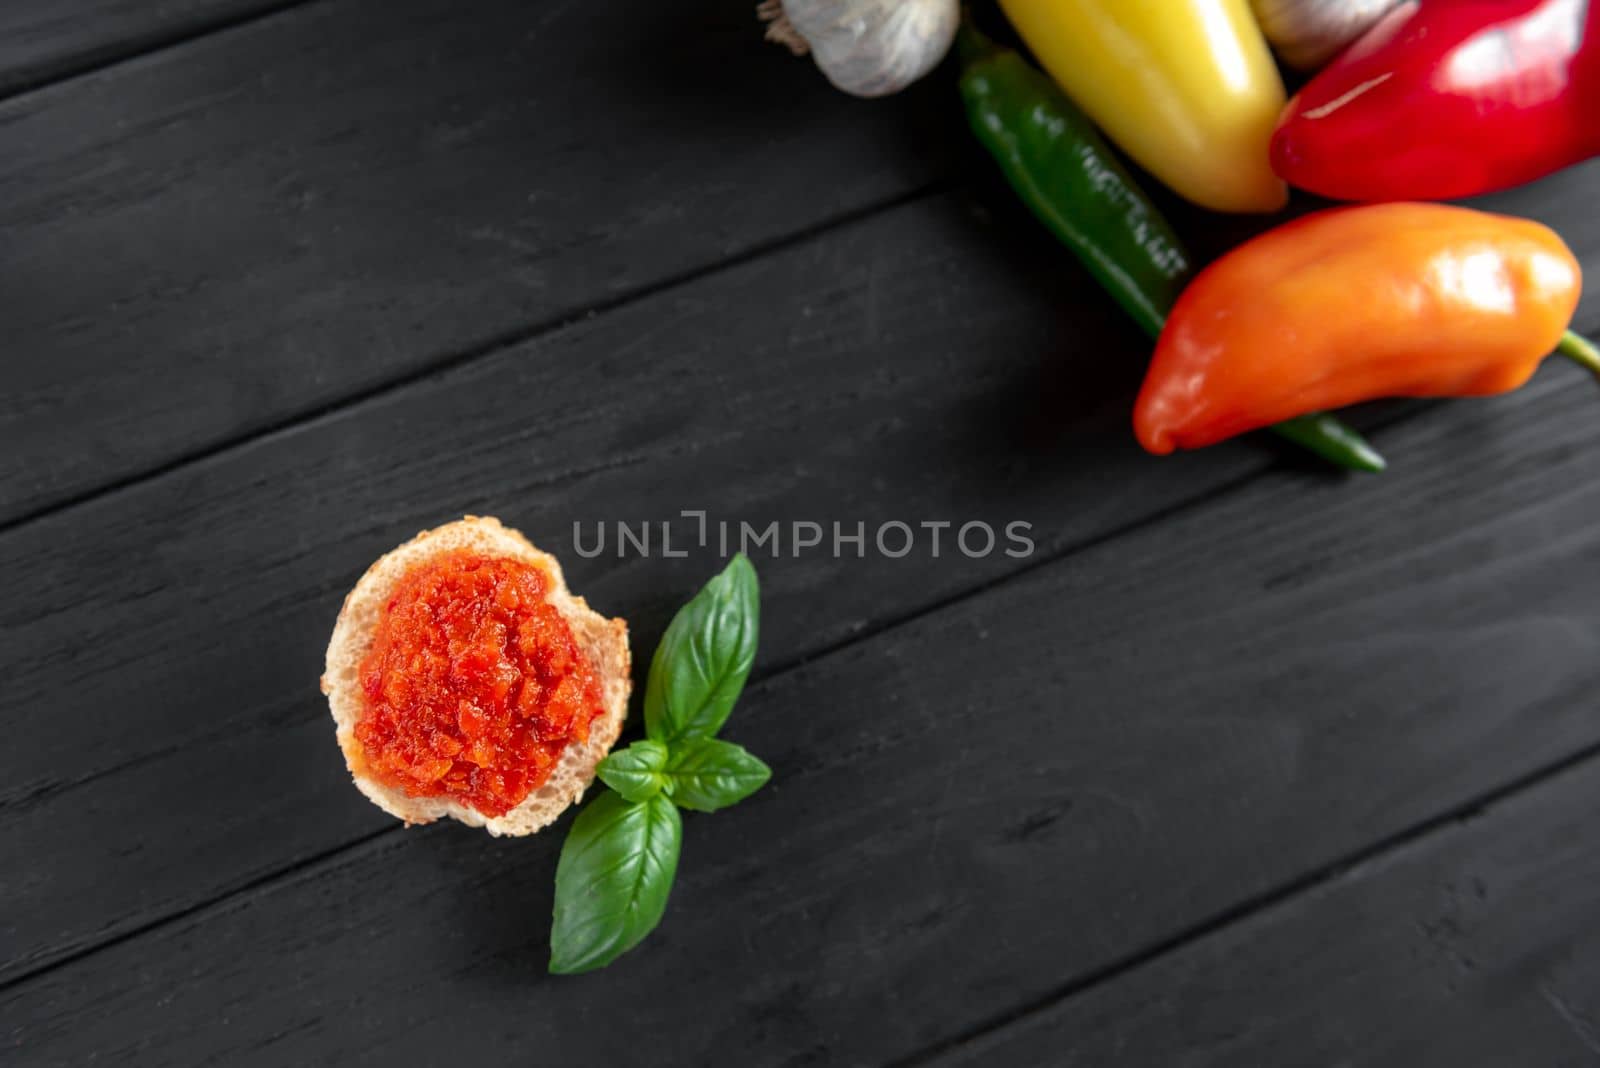 Toast chutney on a wooden background with vegetables in the background by gulyaevstudio